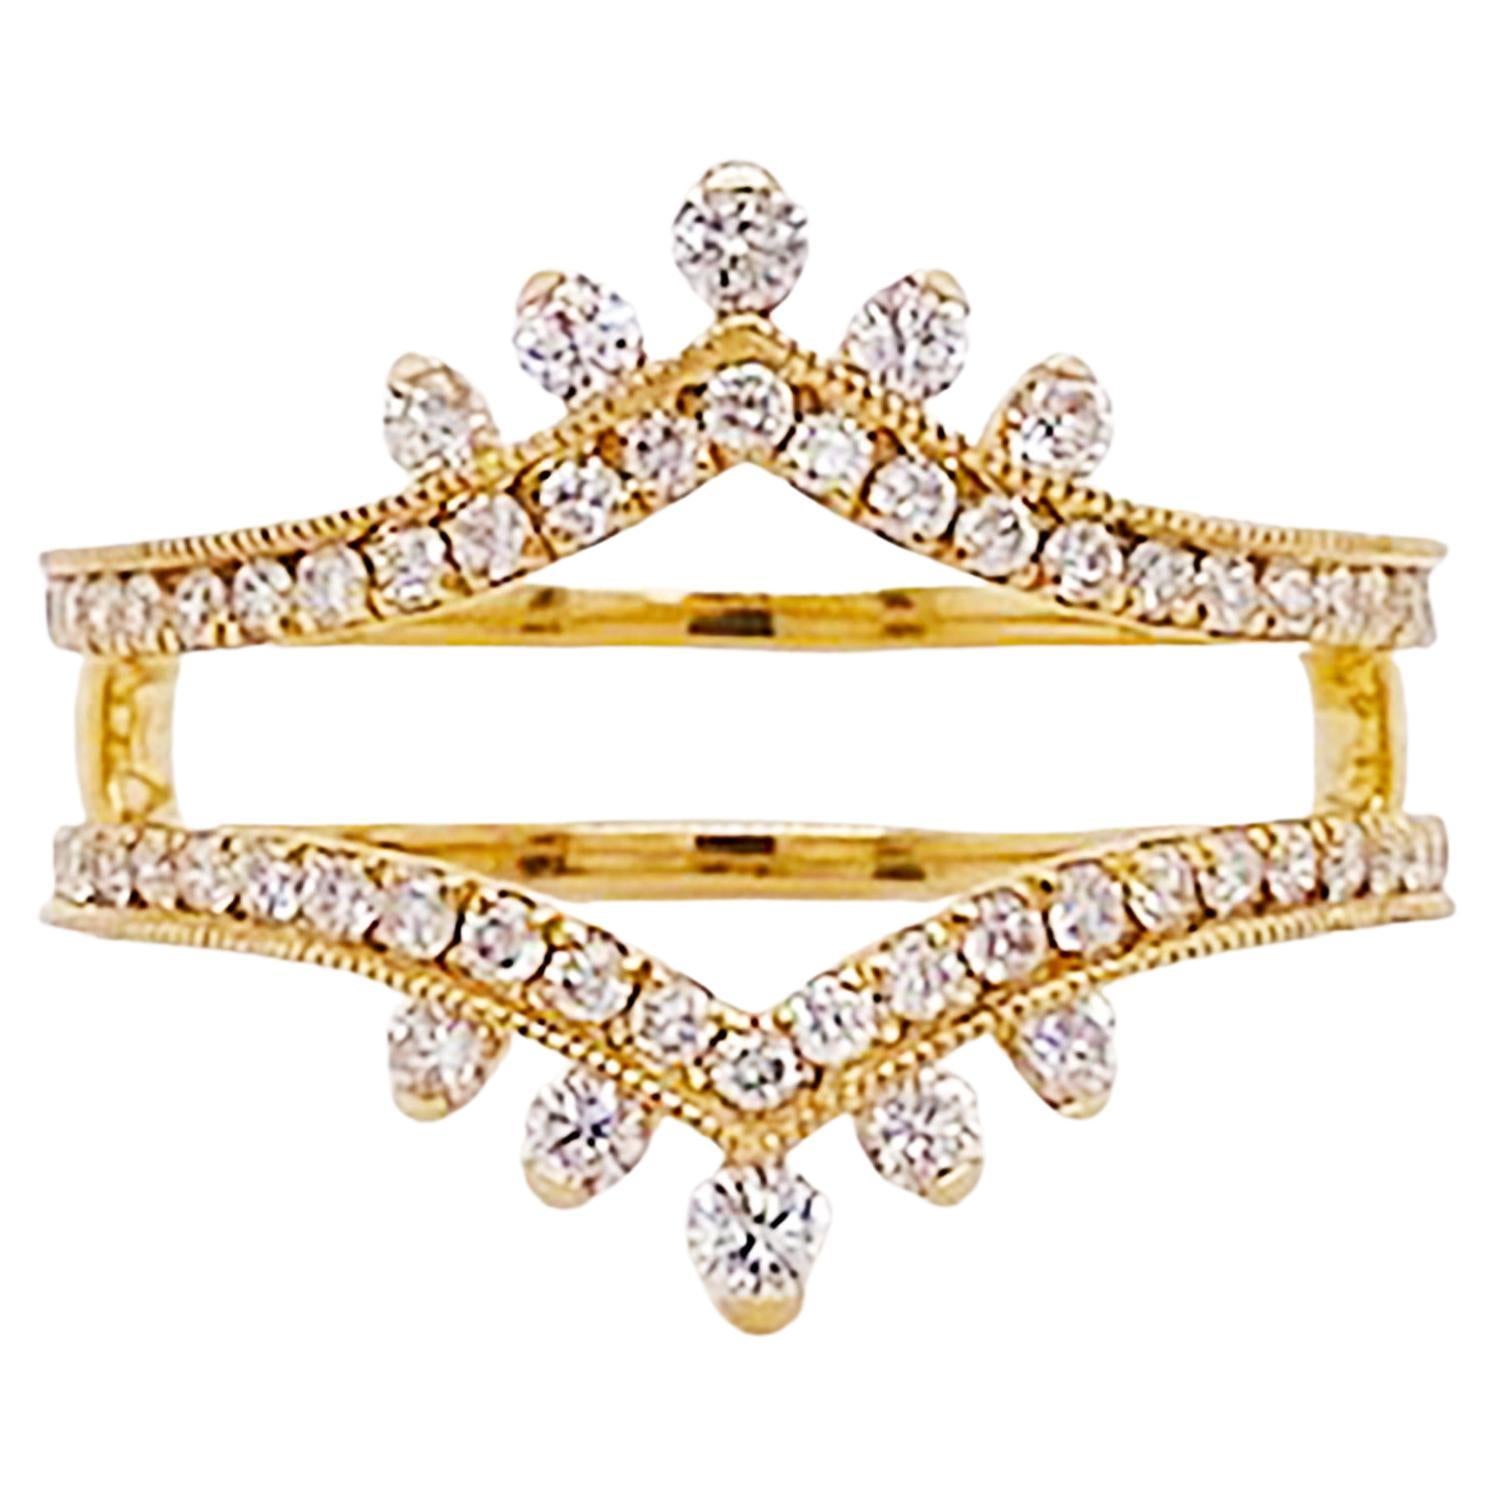 Diamond Tiara Nesting Band: 14k Solid Gold Wide Cigar Ring Guard for Women  | Jewelry By Palak